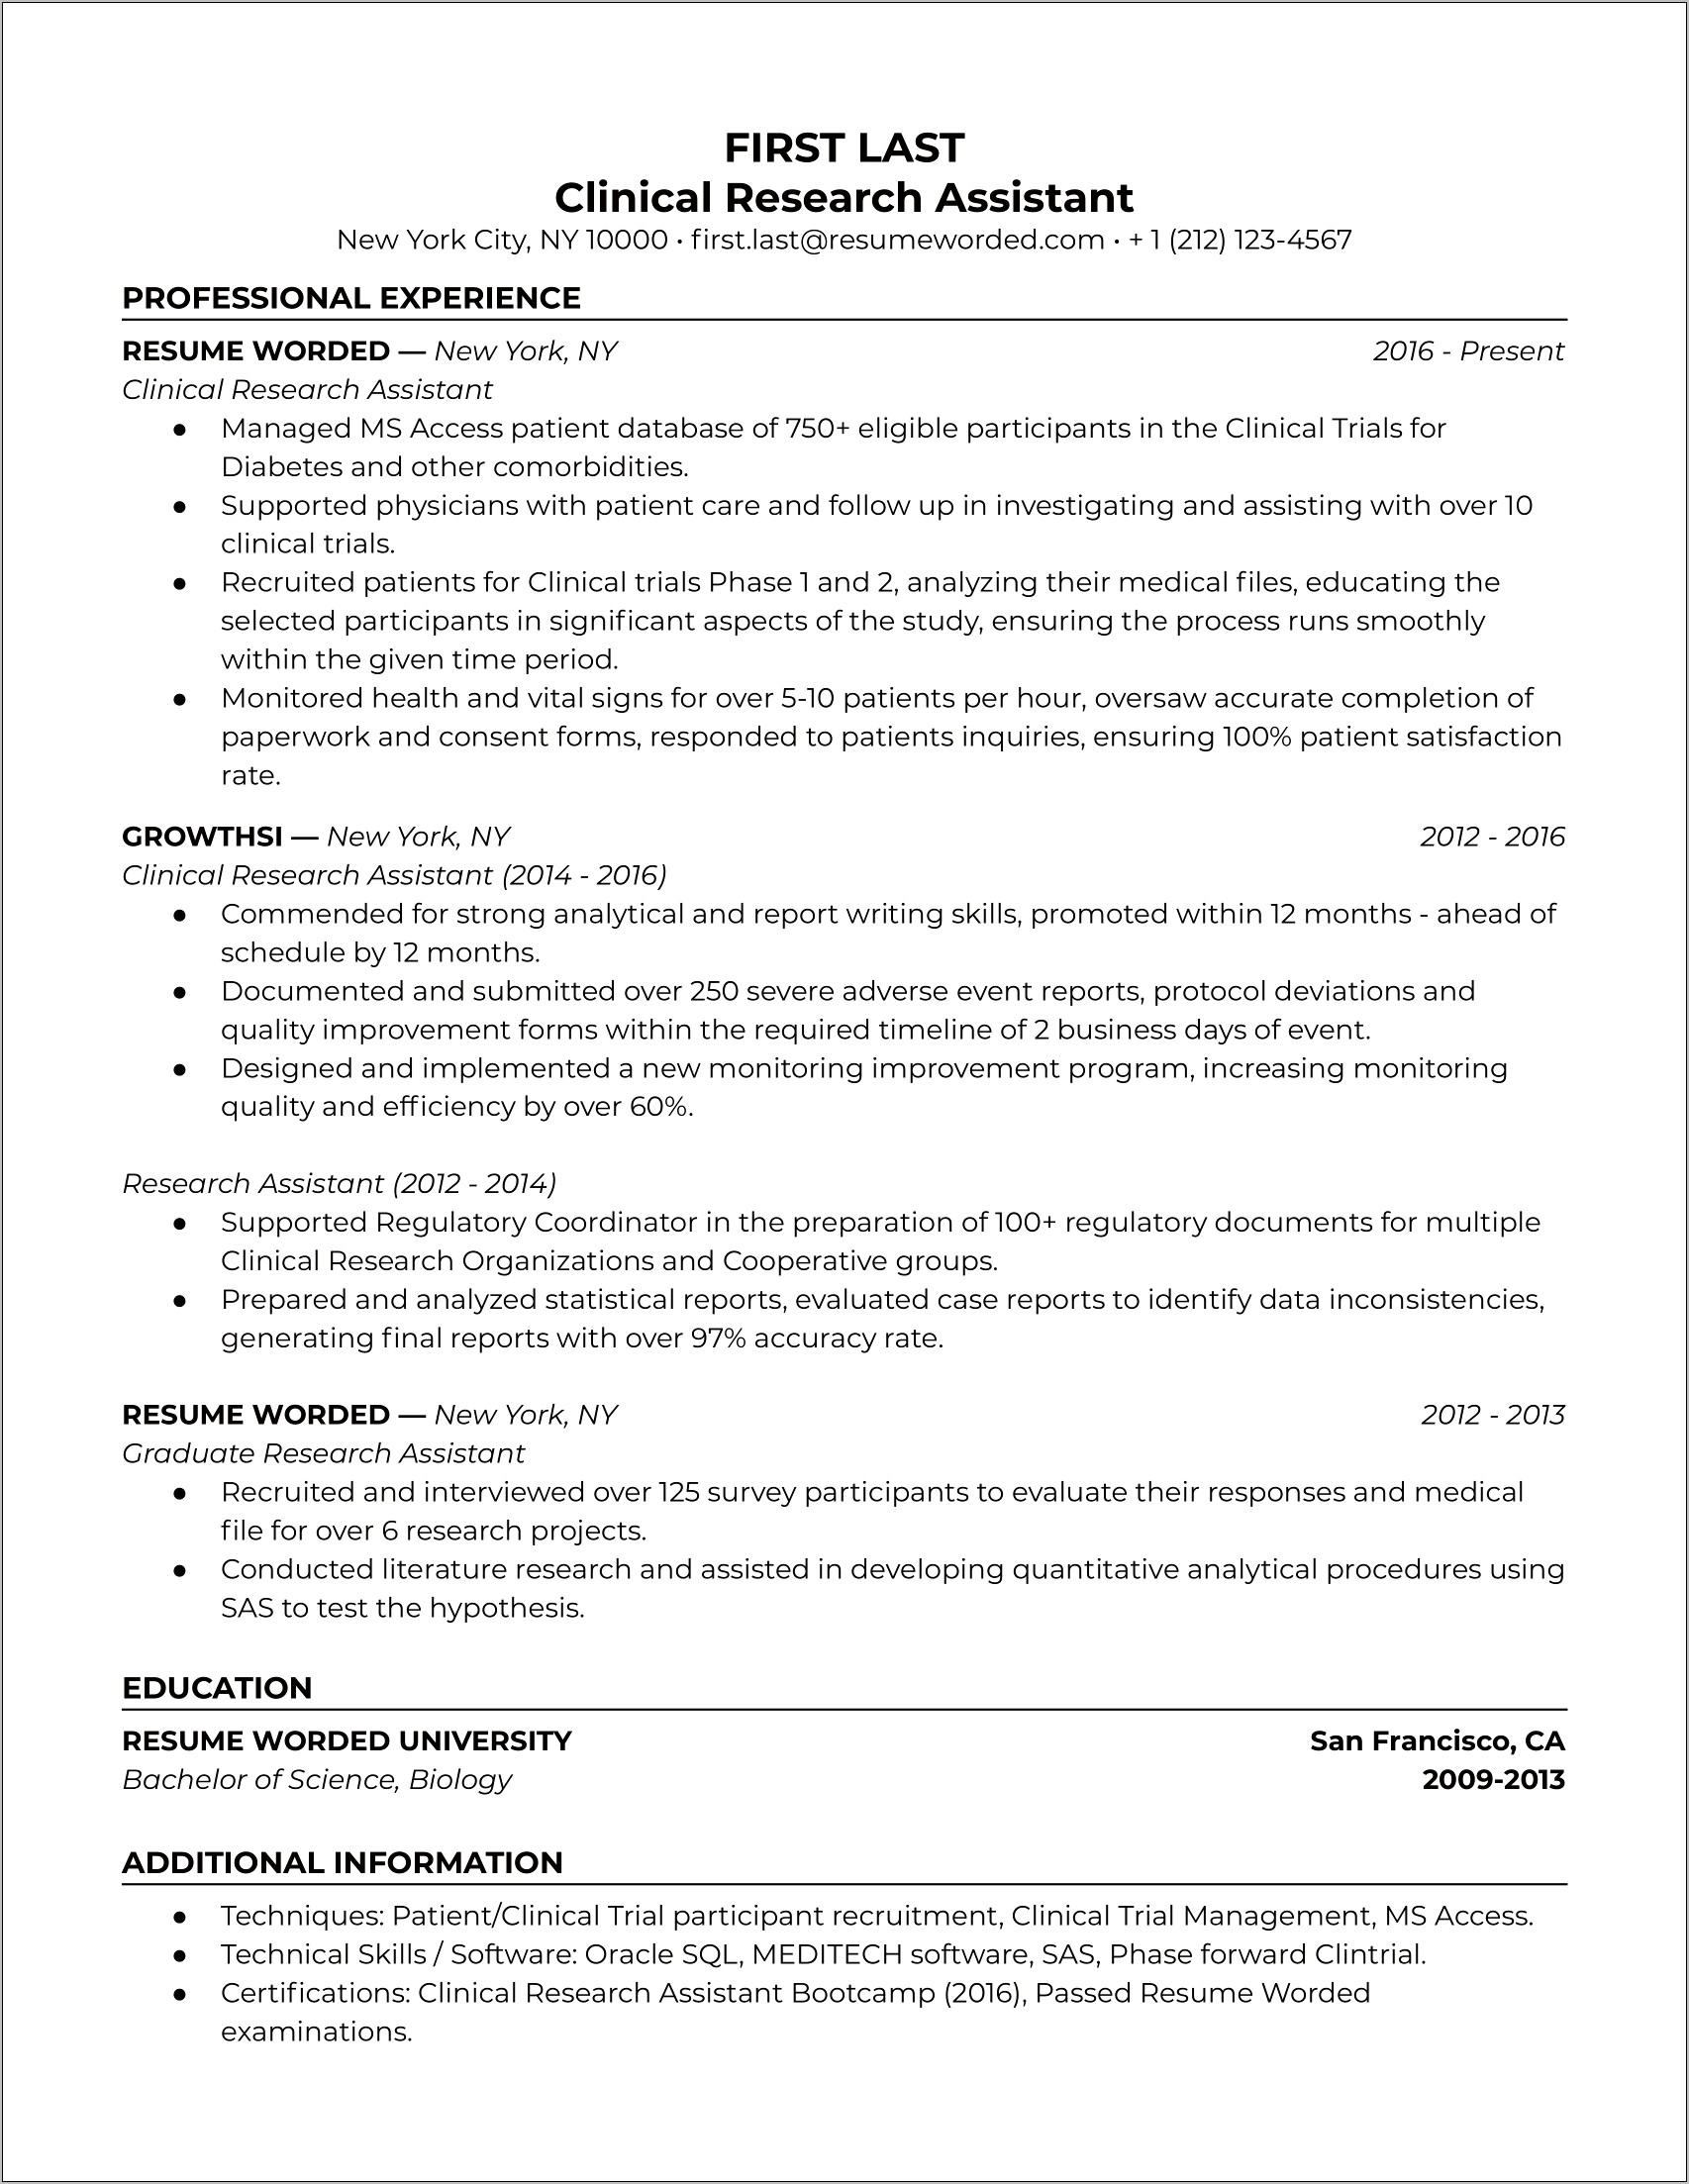 Assist Lab Manager In Developing Experimental Procedures Resume